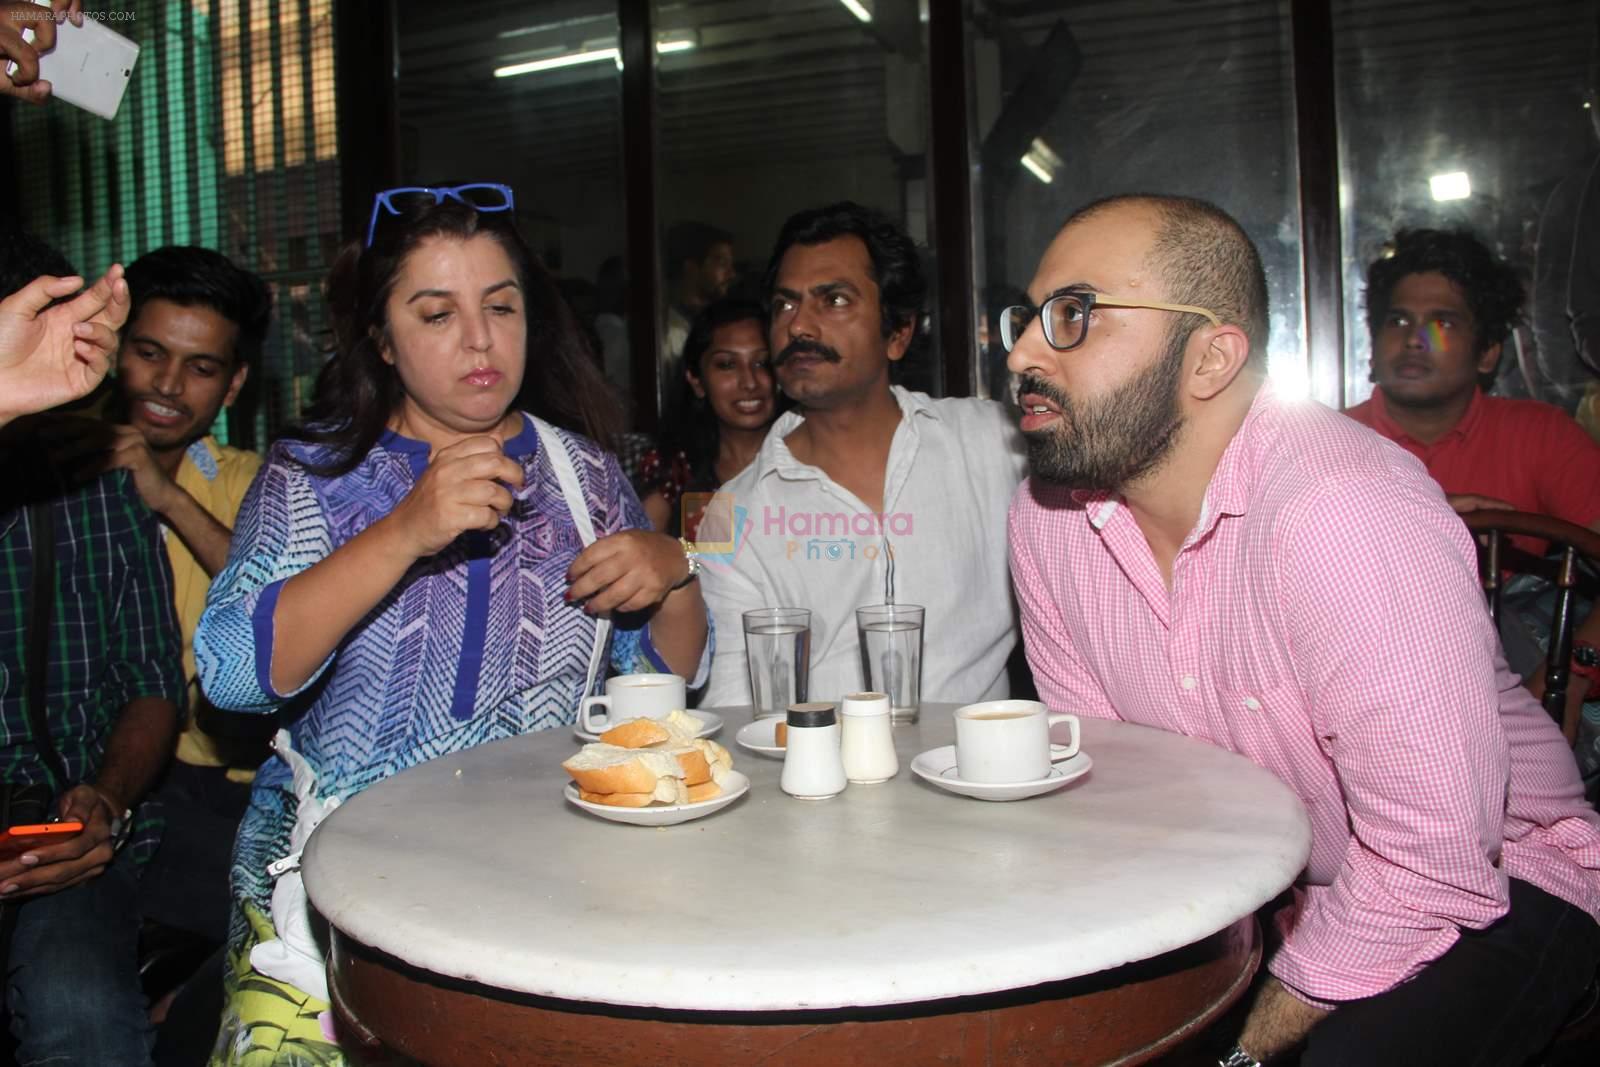 Farah Khan, Nawazuddin Siddiqui at an Irani cafe for Ritesh Batra's Poetic license launch in Grant Road on 4th April 2015